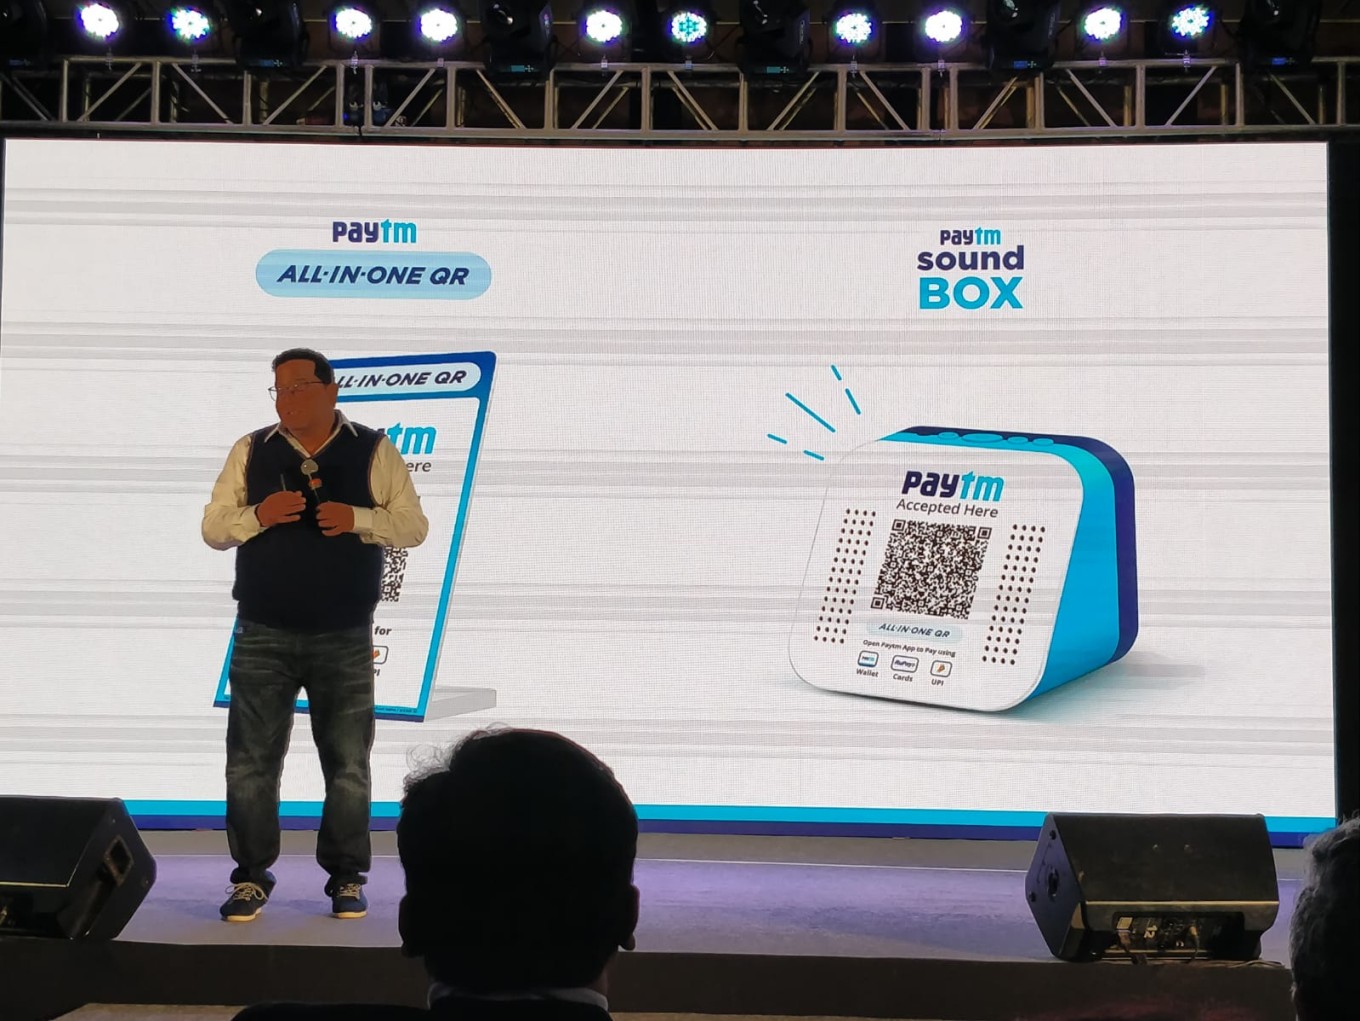 paytm all-in-one QR devices